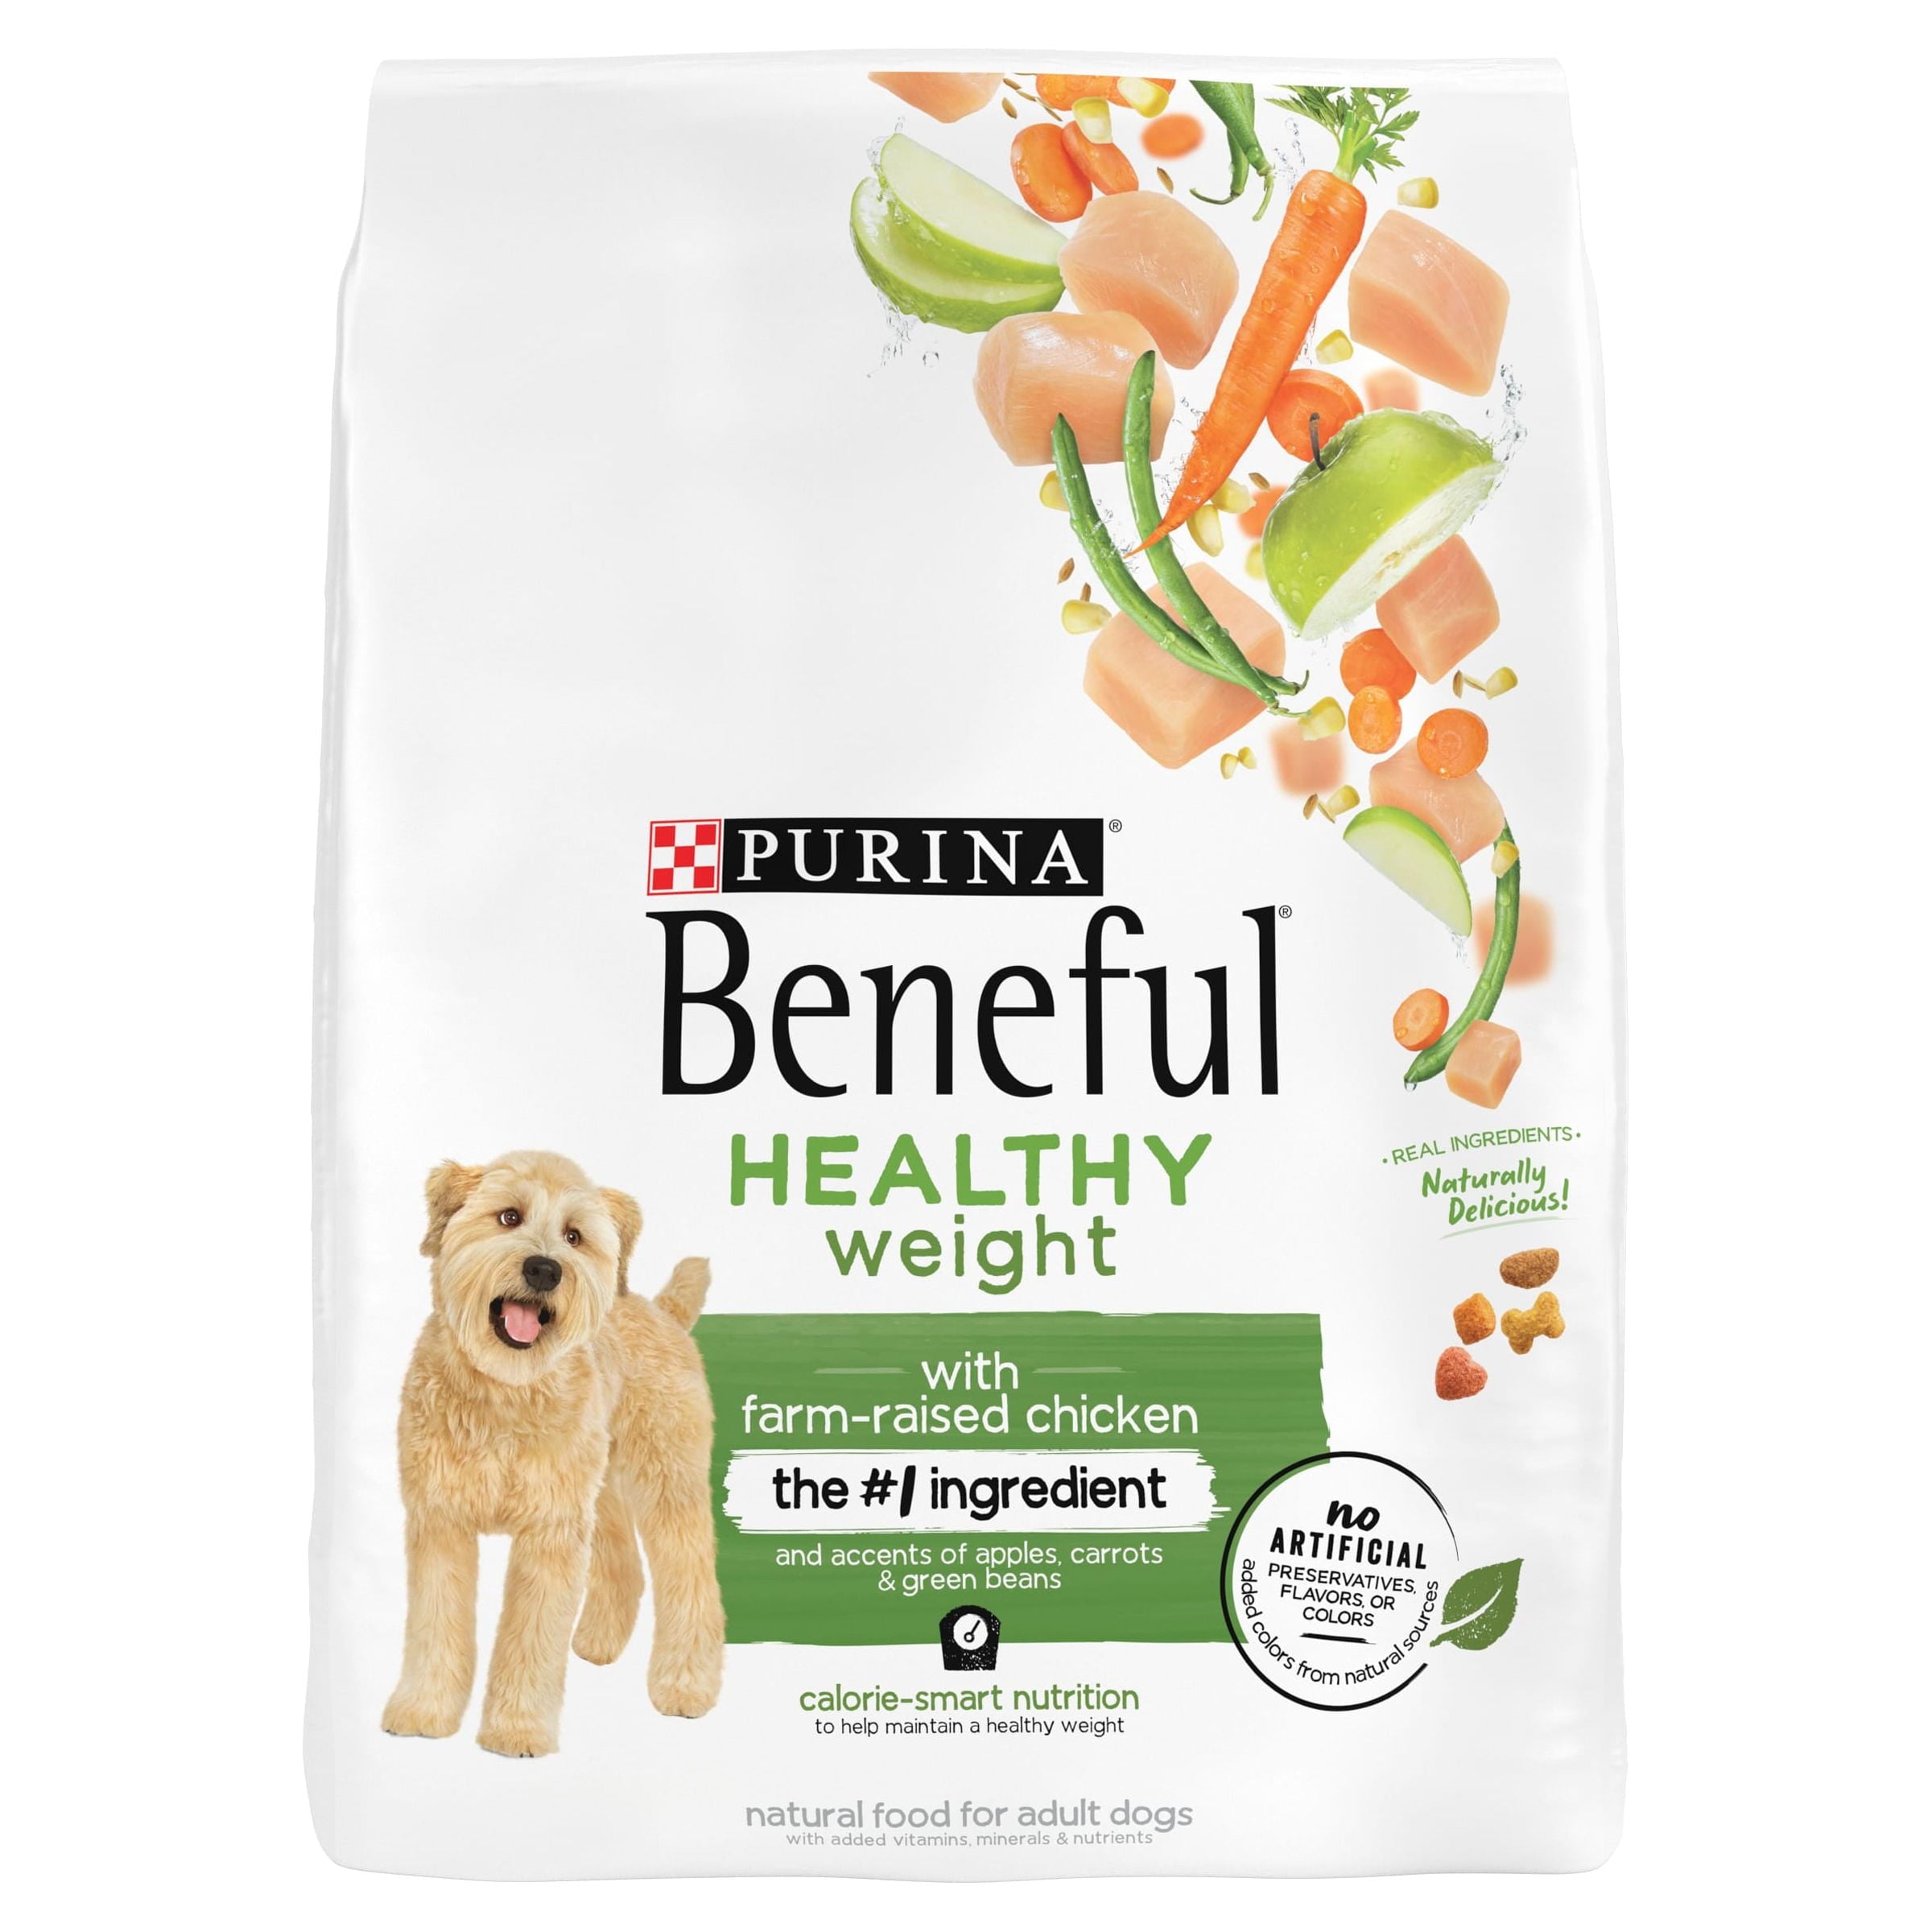 Wholesale prices with free shipping all over United States Purina Beneful Dry Dog Food for Adults Healthy Weight, Farm Raised Chicken, 14 lb Bag - Steven Deals